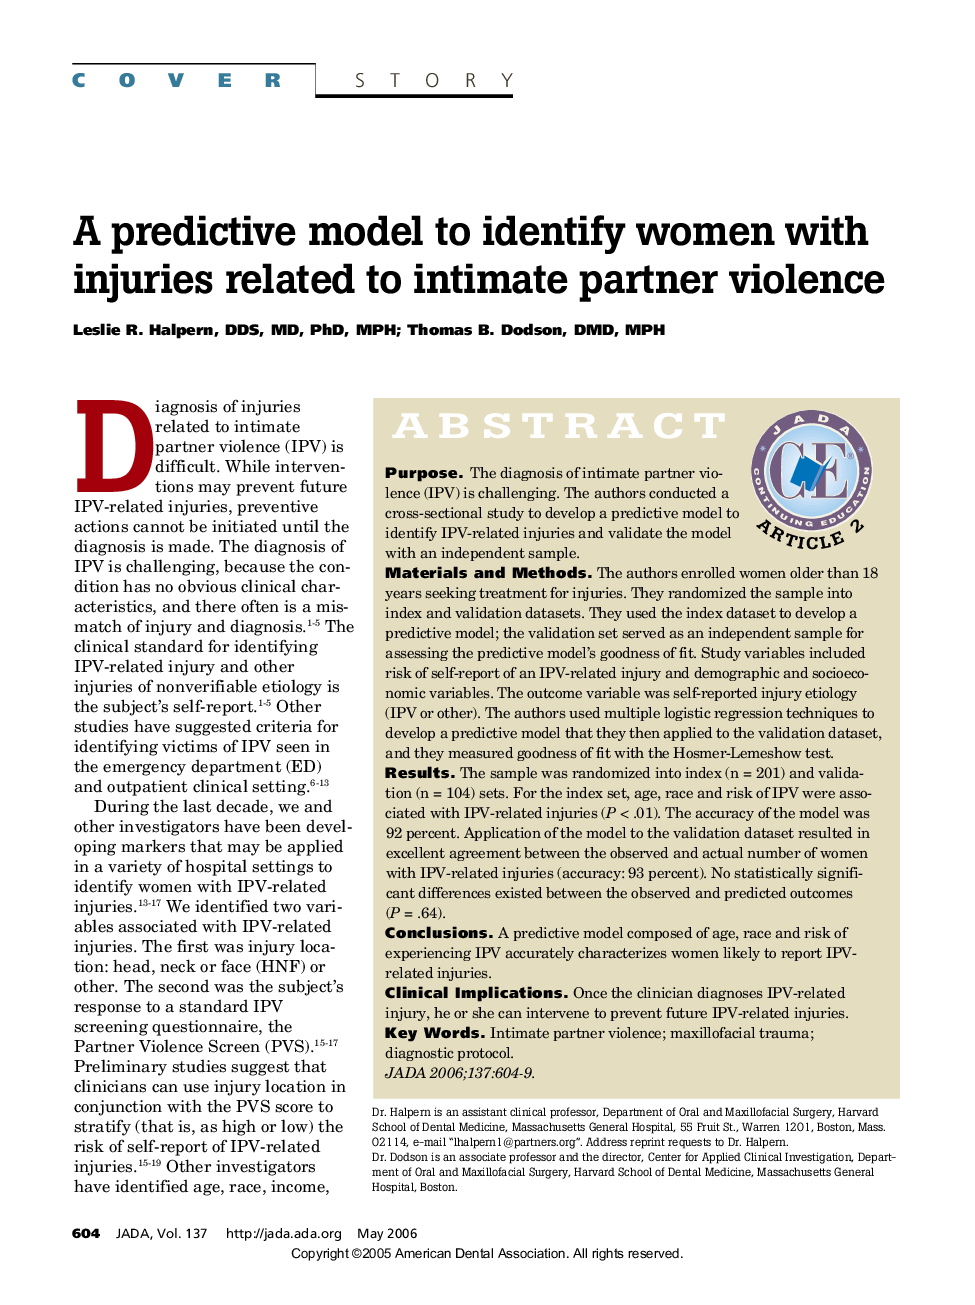 A predictive model to identify women with injuries related to intimate partner violence 